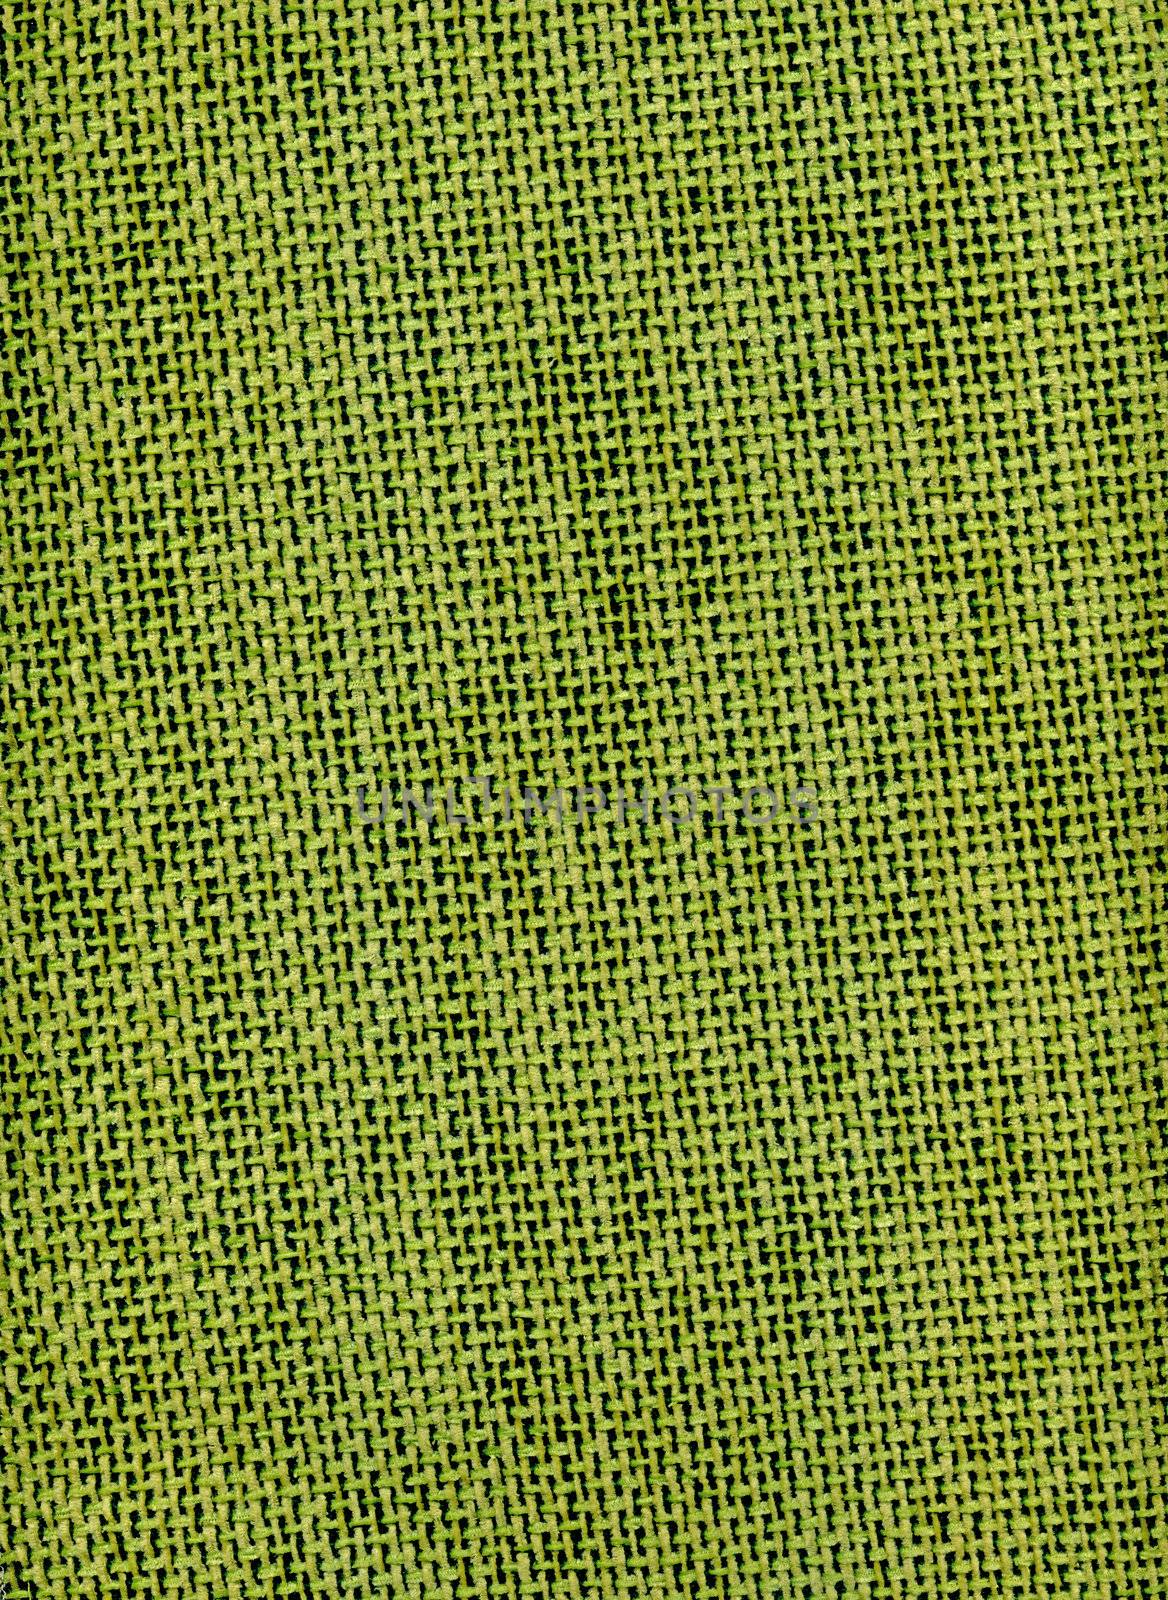 Abstract green background - very detailed and real...